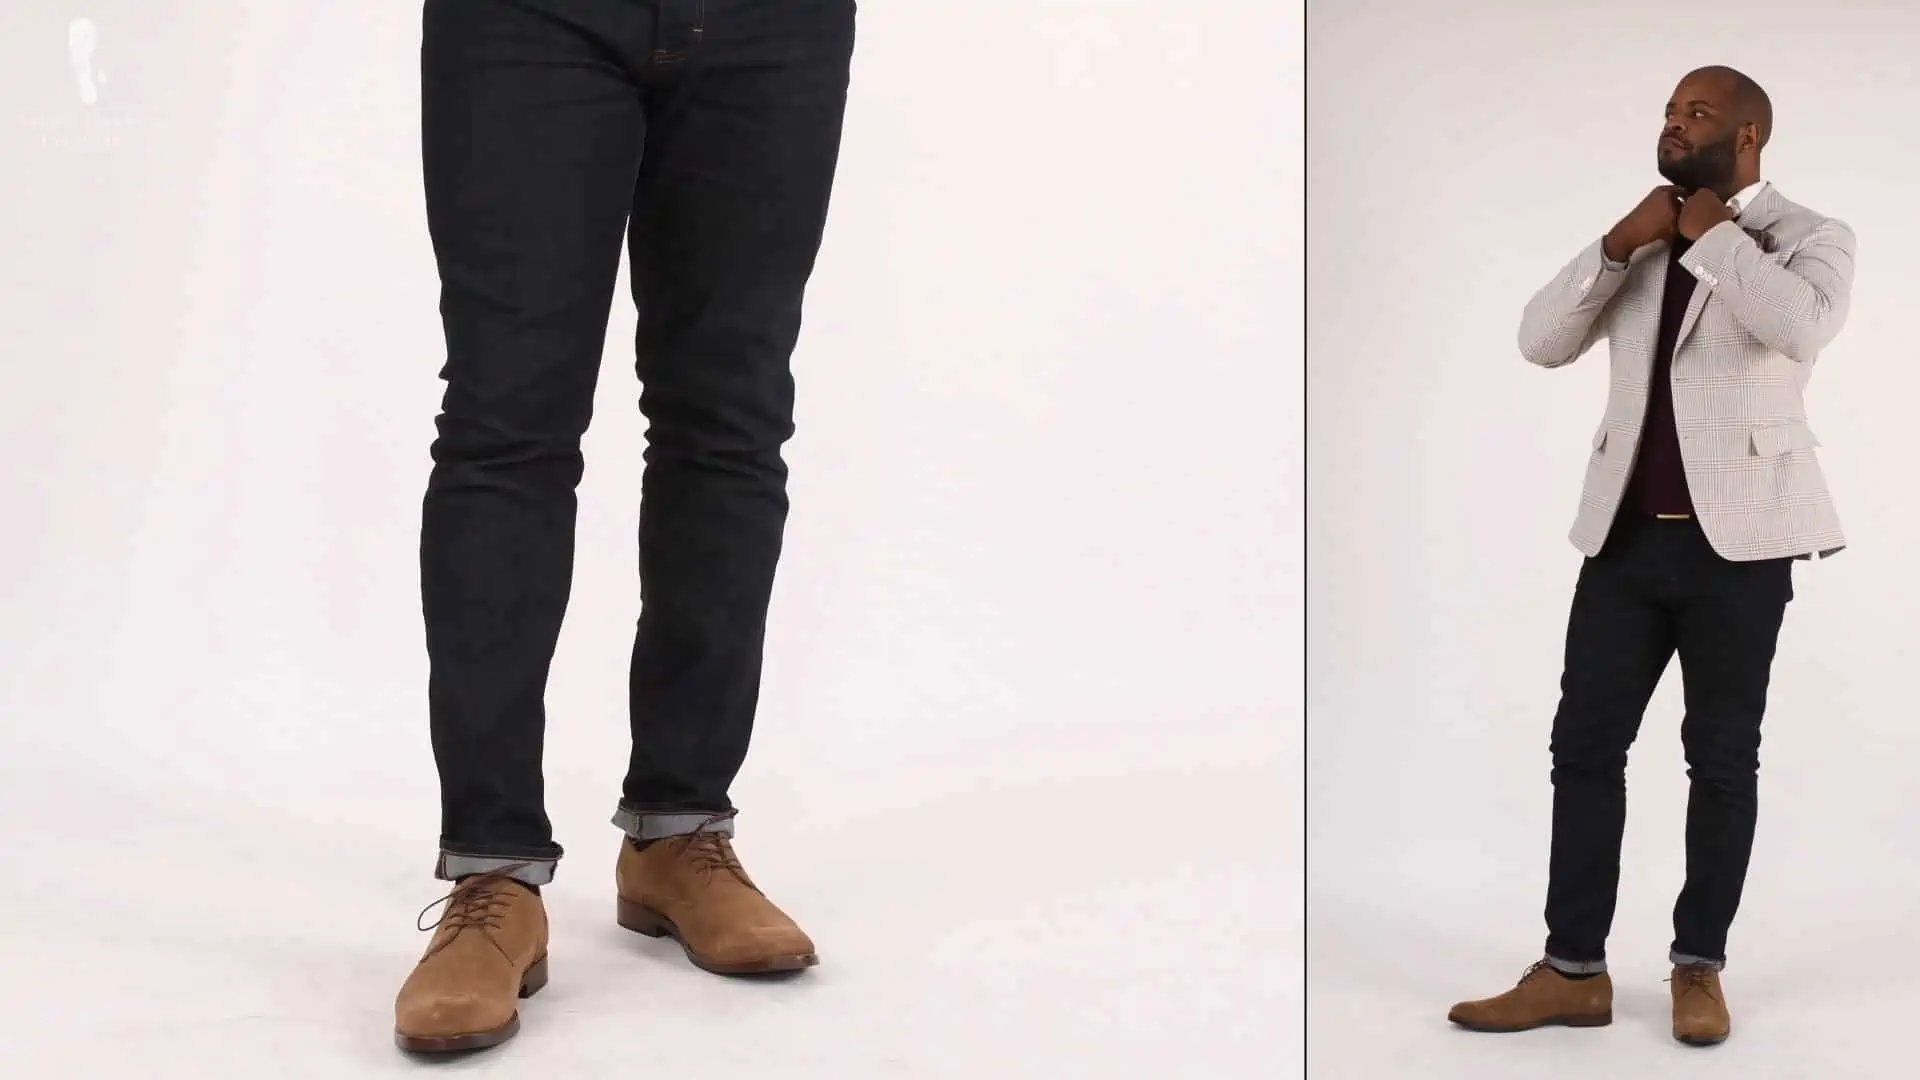 Black Shoes & Jeans? My Thoughts On This Style Combination - YouTube